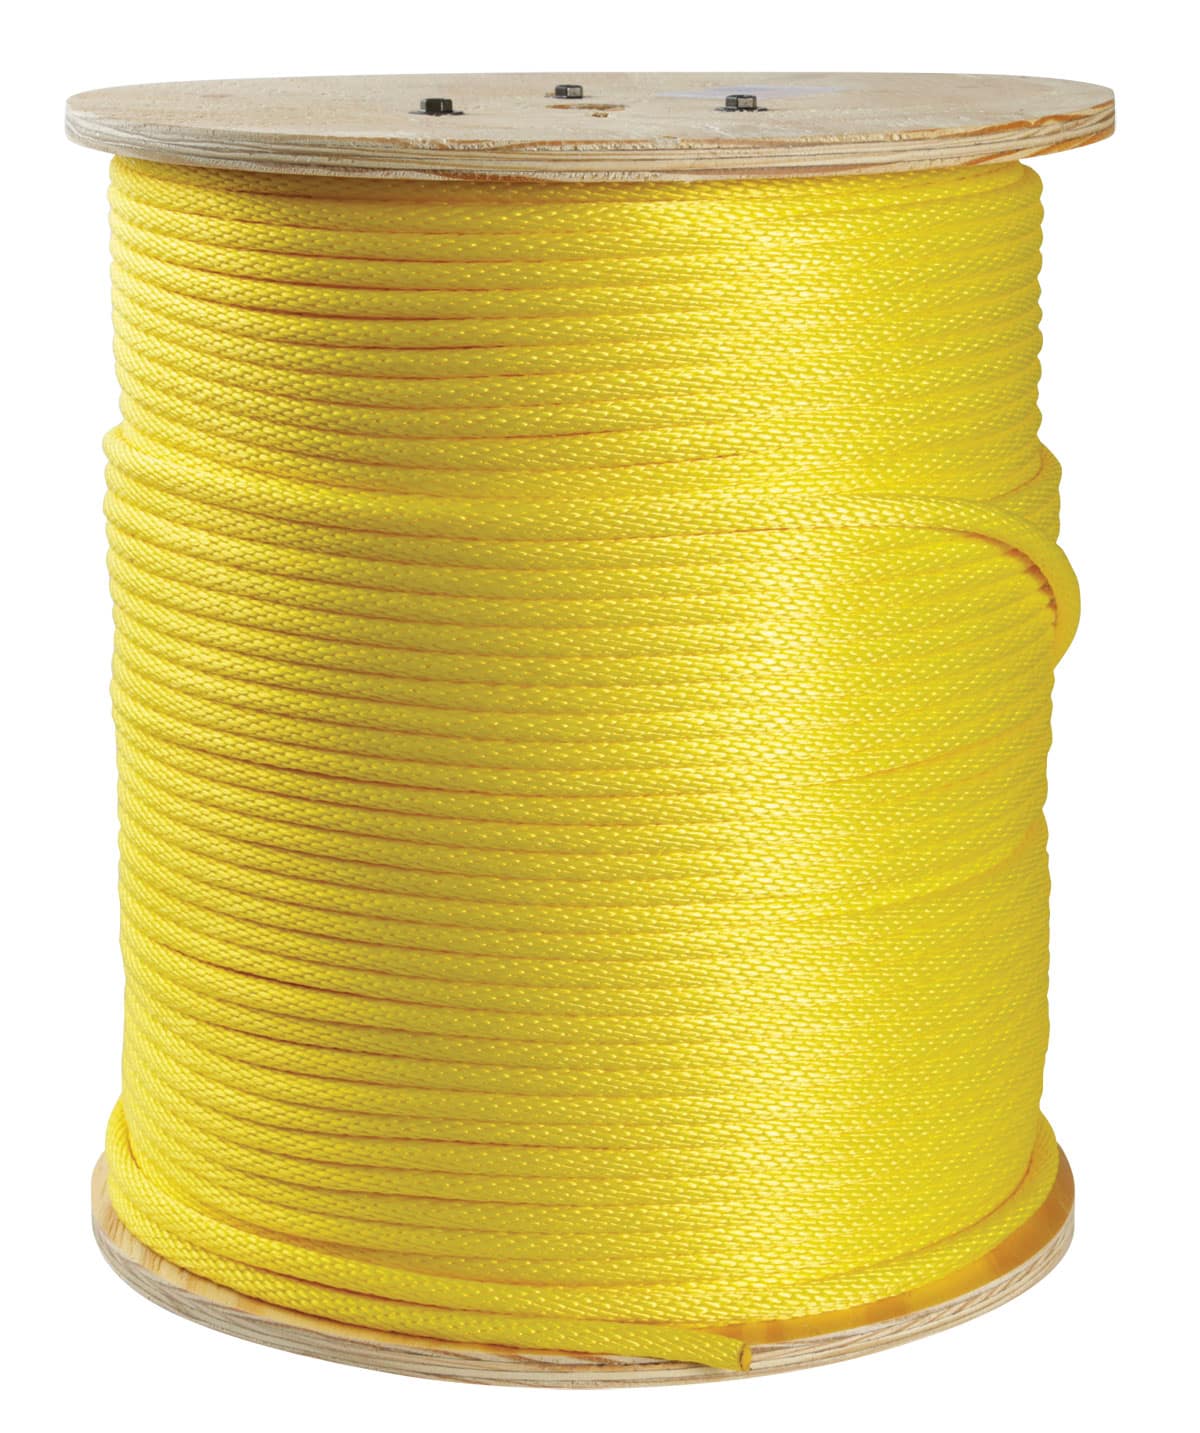 All Products - Erin Rope Corporation